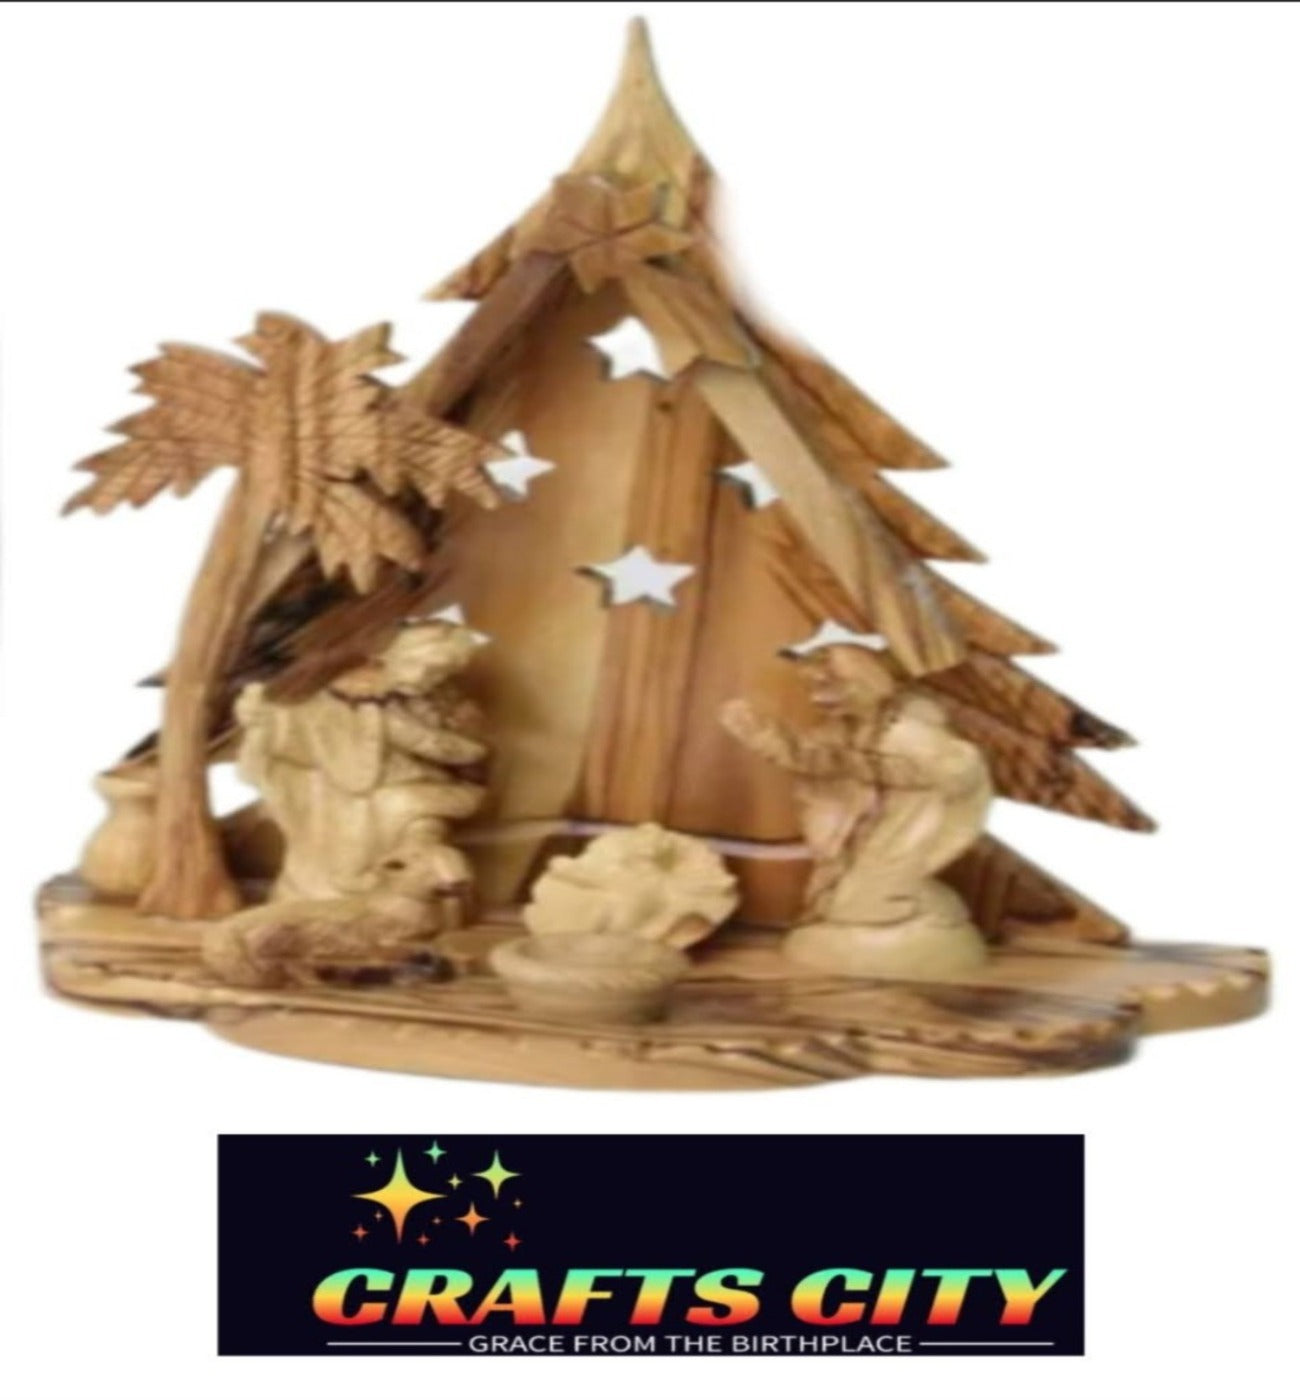 "Exquisite 17 cm Hand-Crafted Olive Wood Nativity Scene: A Reverent Celebration"